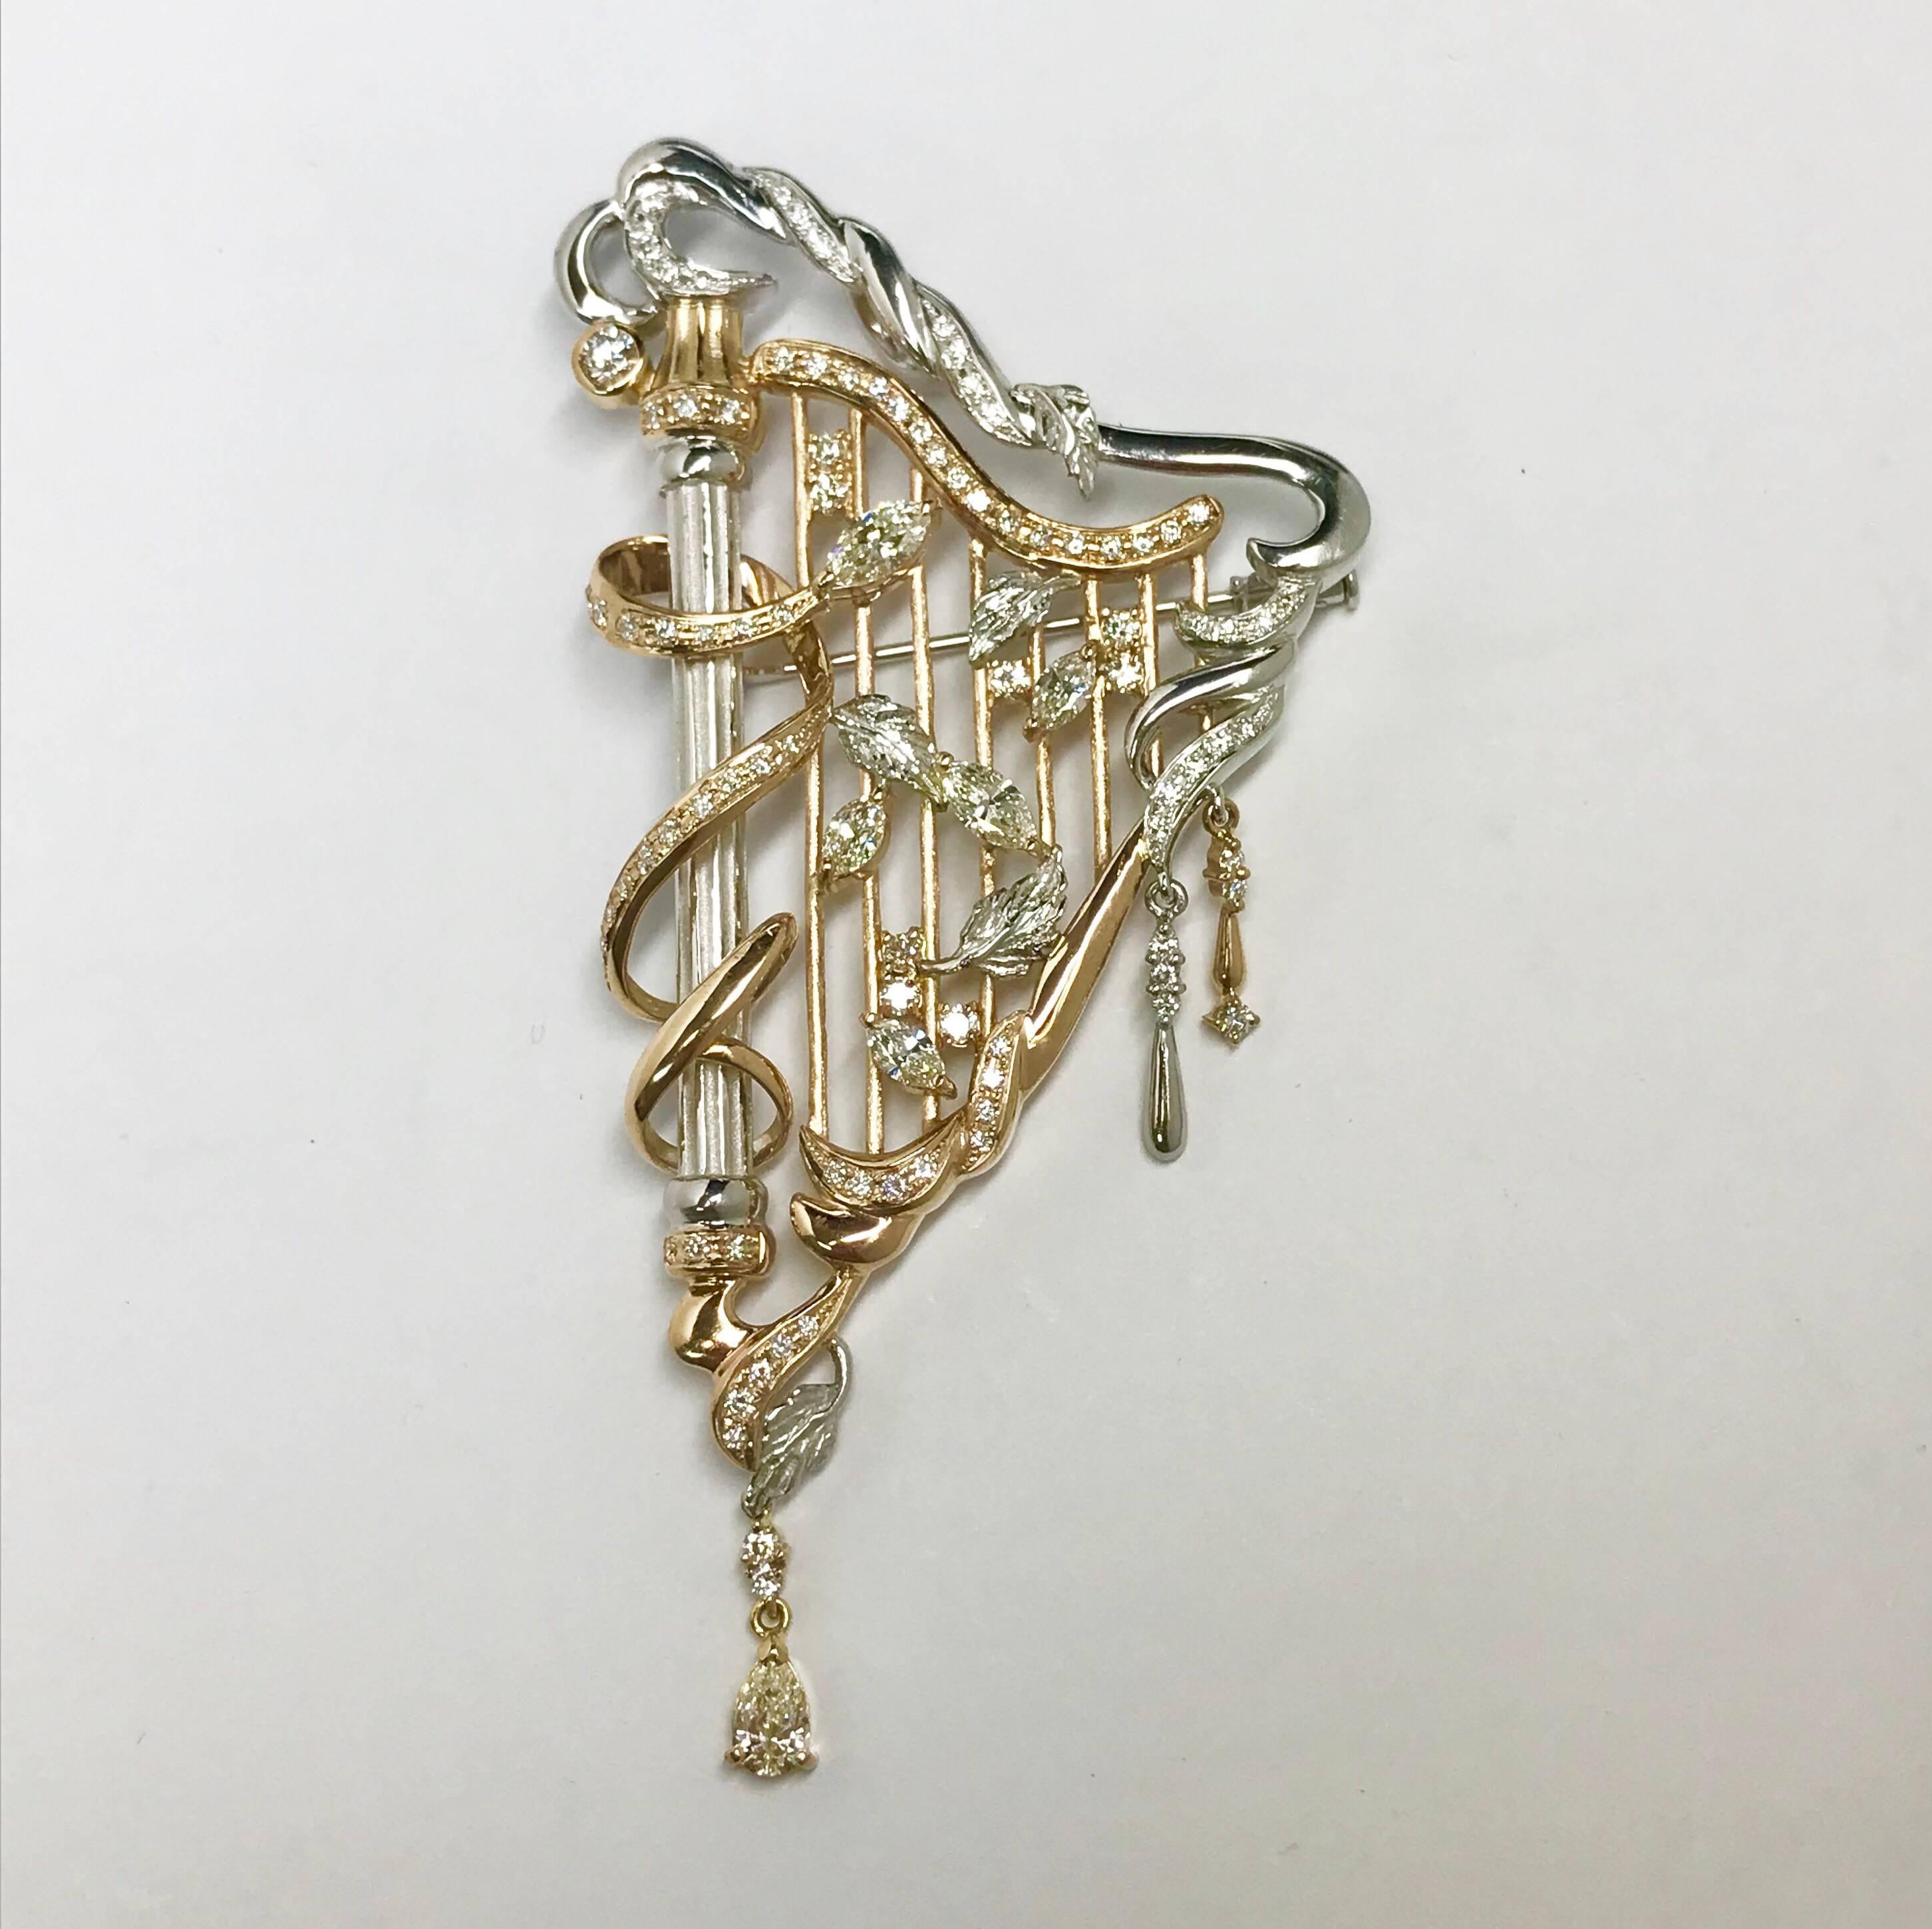 All buyers outside of Japan will receive -8% tax exemption from the list price. 
Please inquire for details.
Metai : K18PG/WG
Diamonds : 2.77ct 
A chain necklace shown in the picture is a sample, not included.
Unique Piece / Brand New Condition
All